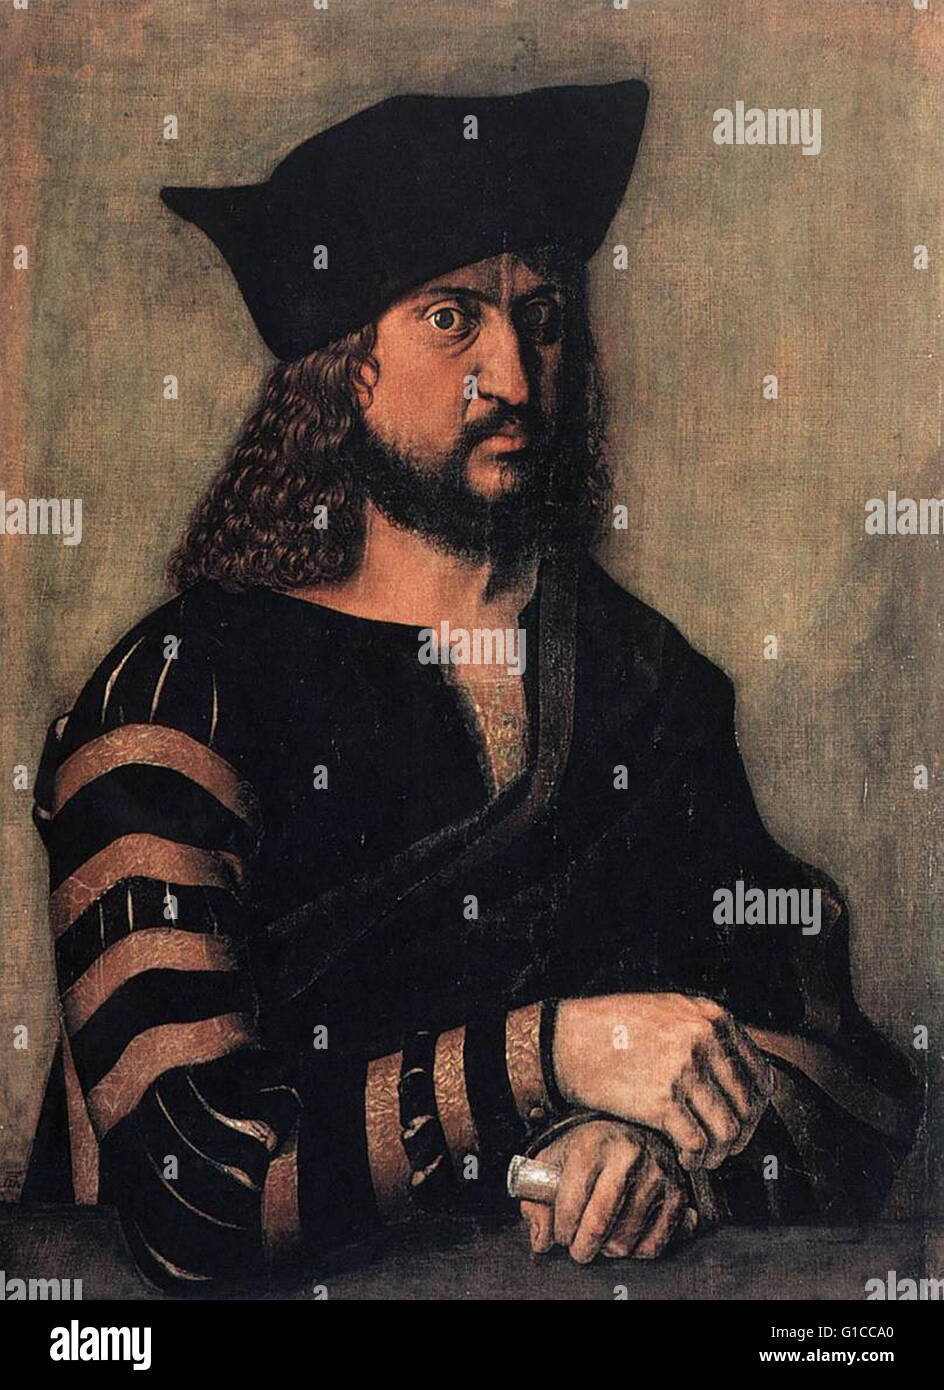 Portrait of Frederick III, Elector of Saxony (1463-1525) by Albrecht Dürer (1471-1528) a painter, printmaker and theorist of the German Renaissance. Dated 16th Century Stock Photo